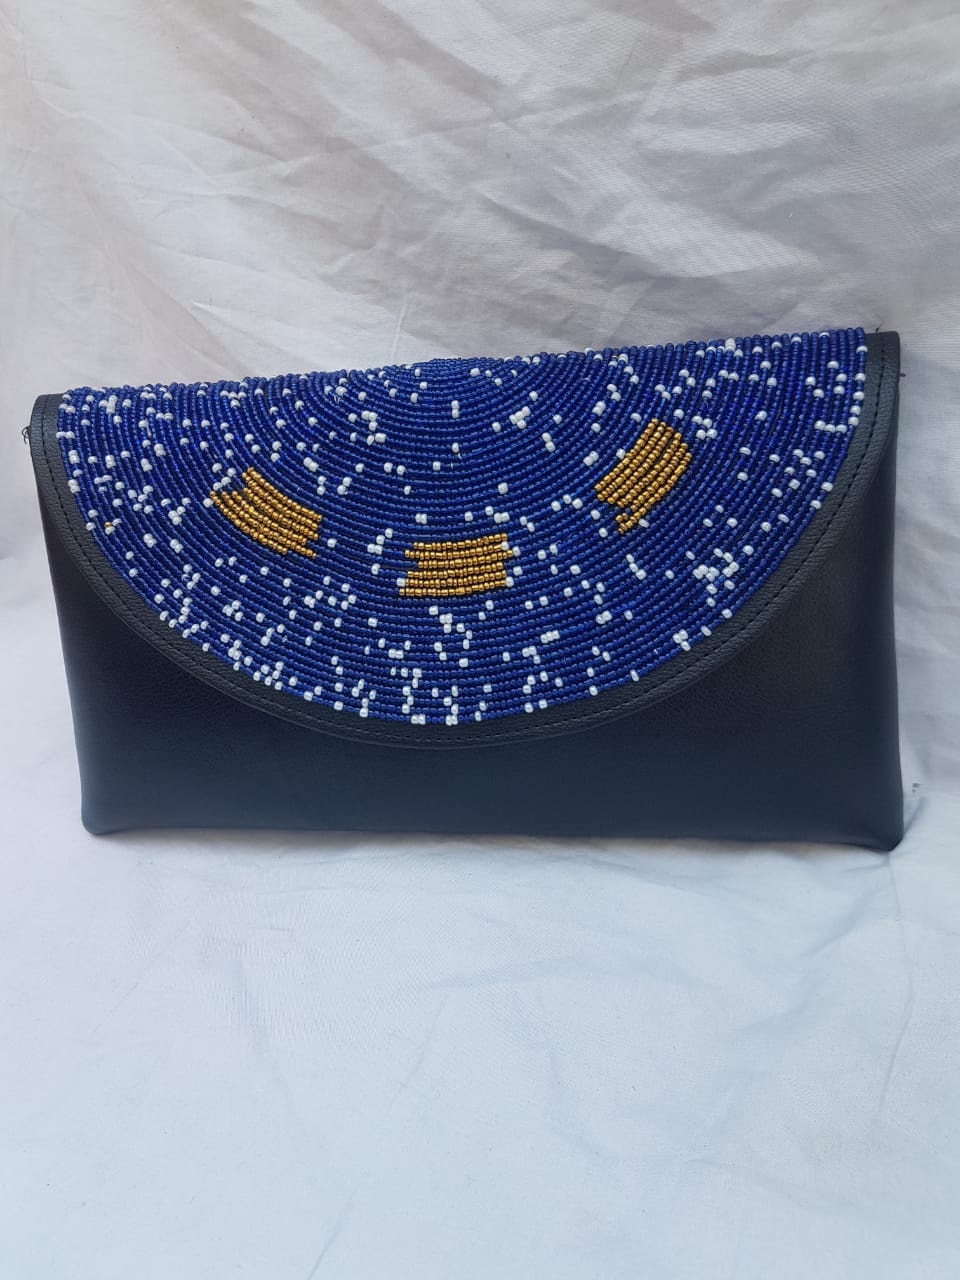 Leather clutch purse decorated with blue beads.